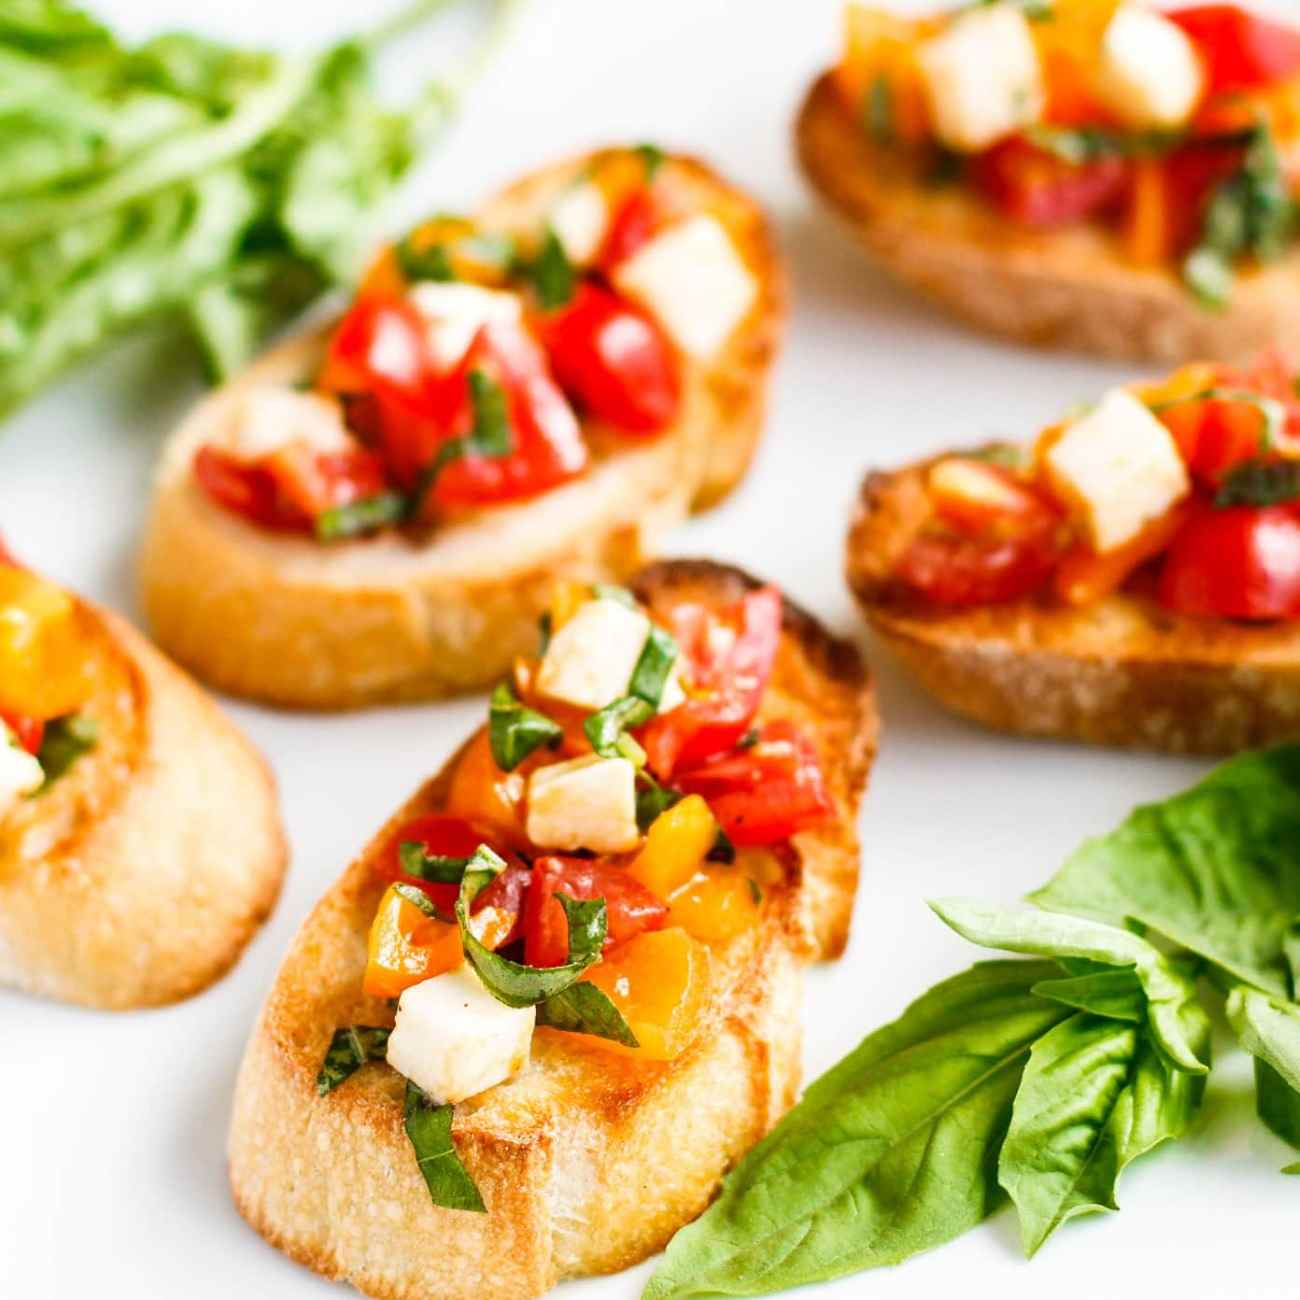 simple finger food recipes for bruschetta with cherry tomatoes and mozzarella garnish with basil leaves